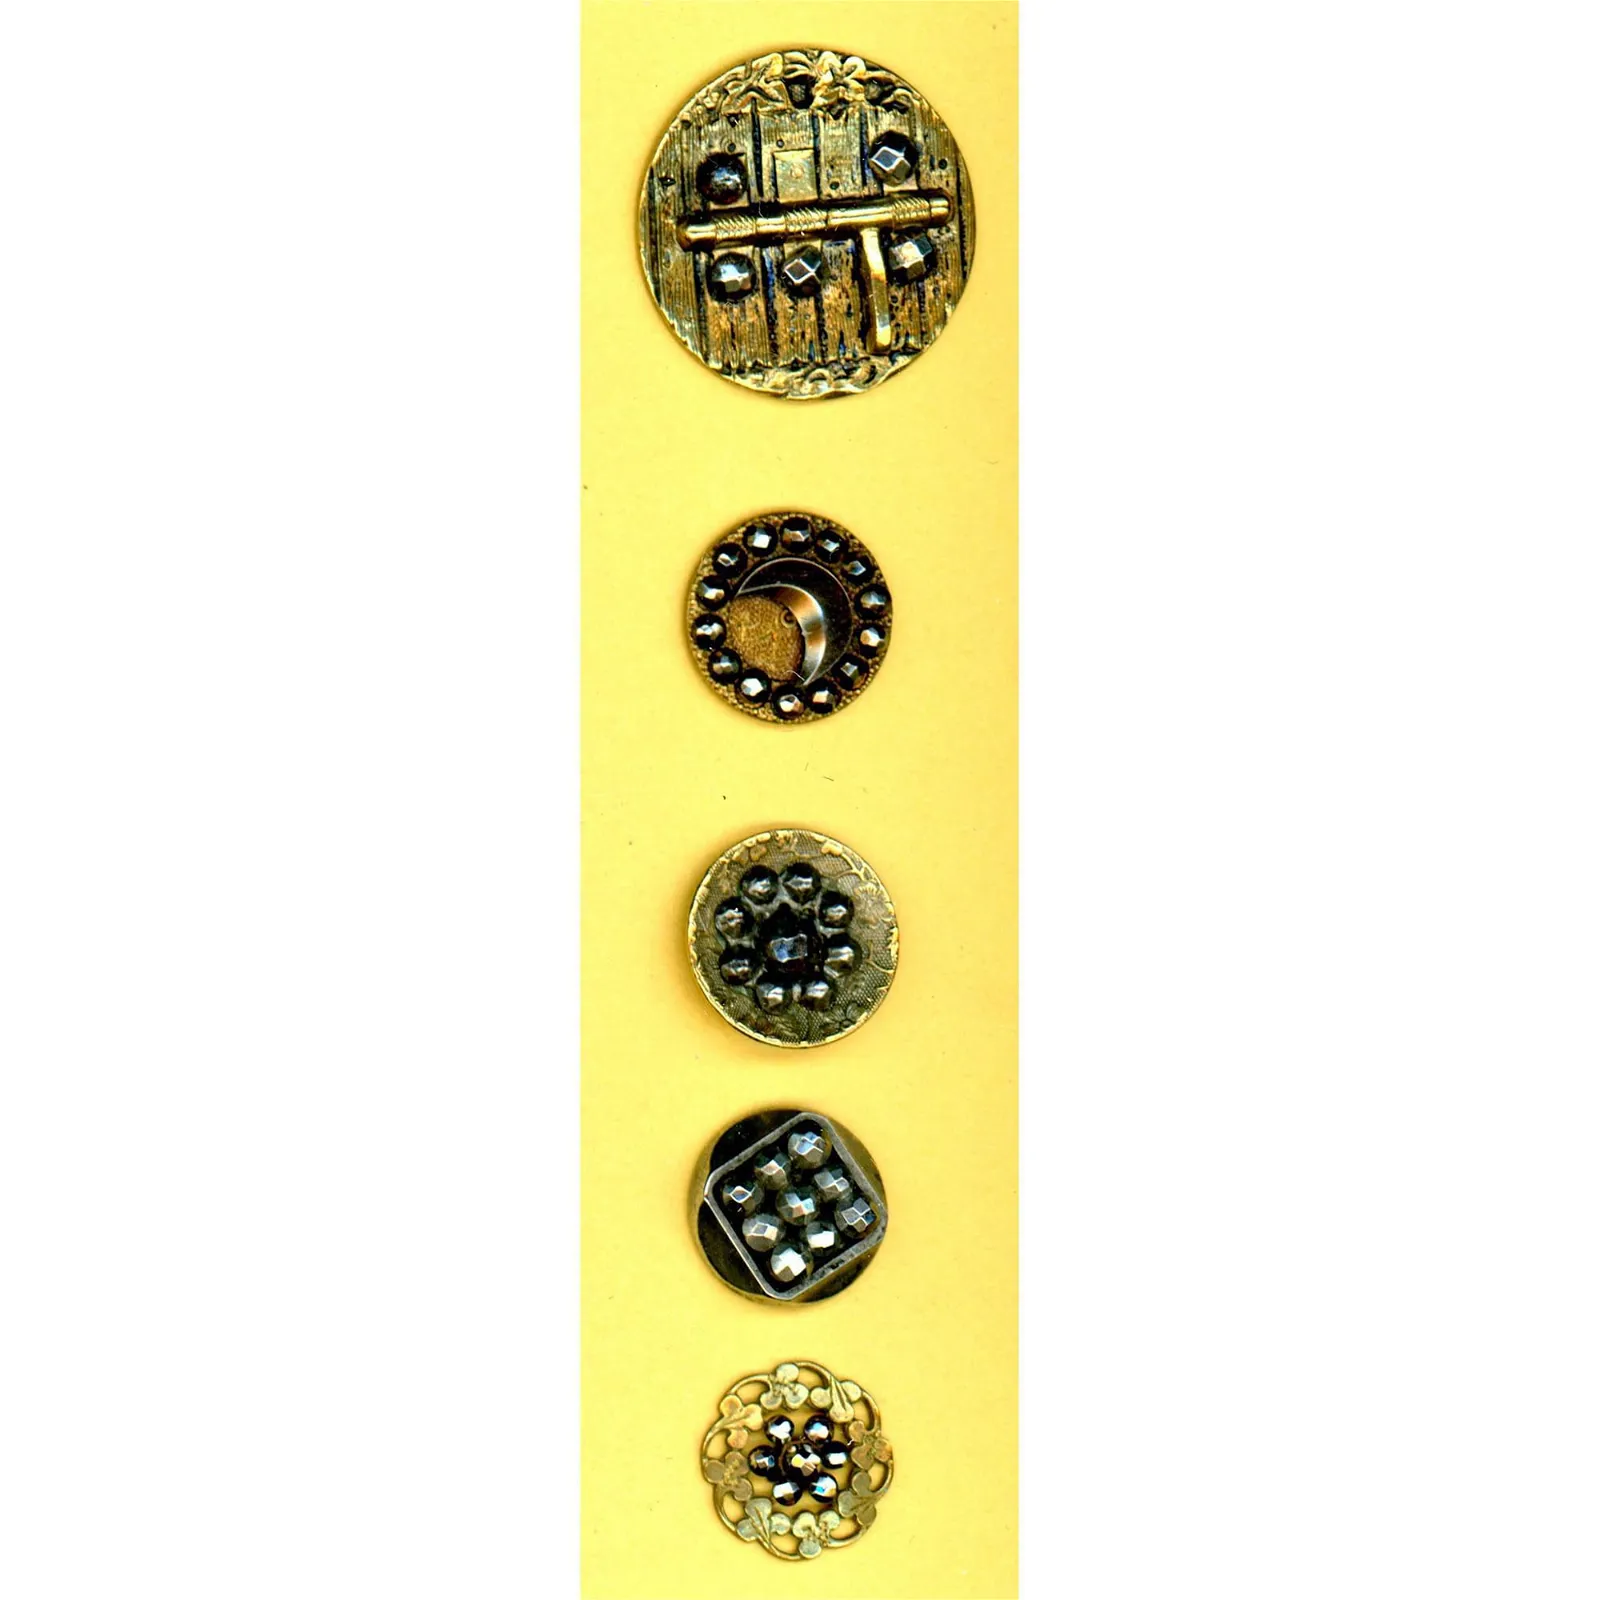 A chocked full card of brass and steel buttons